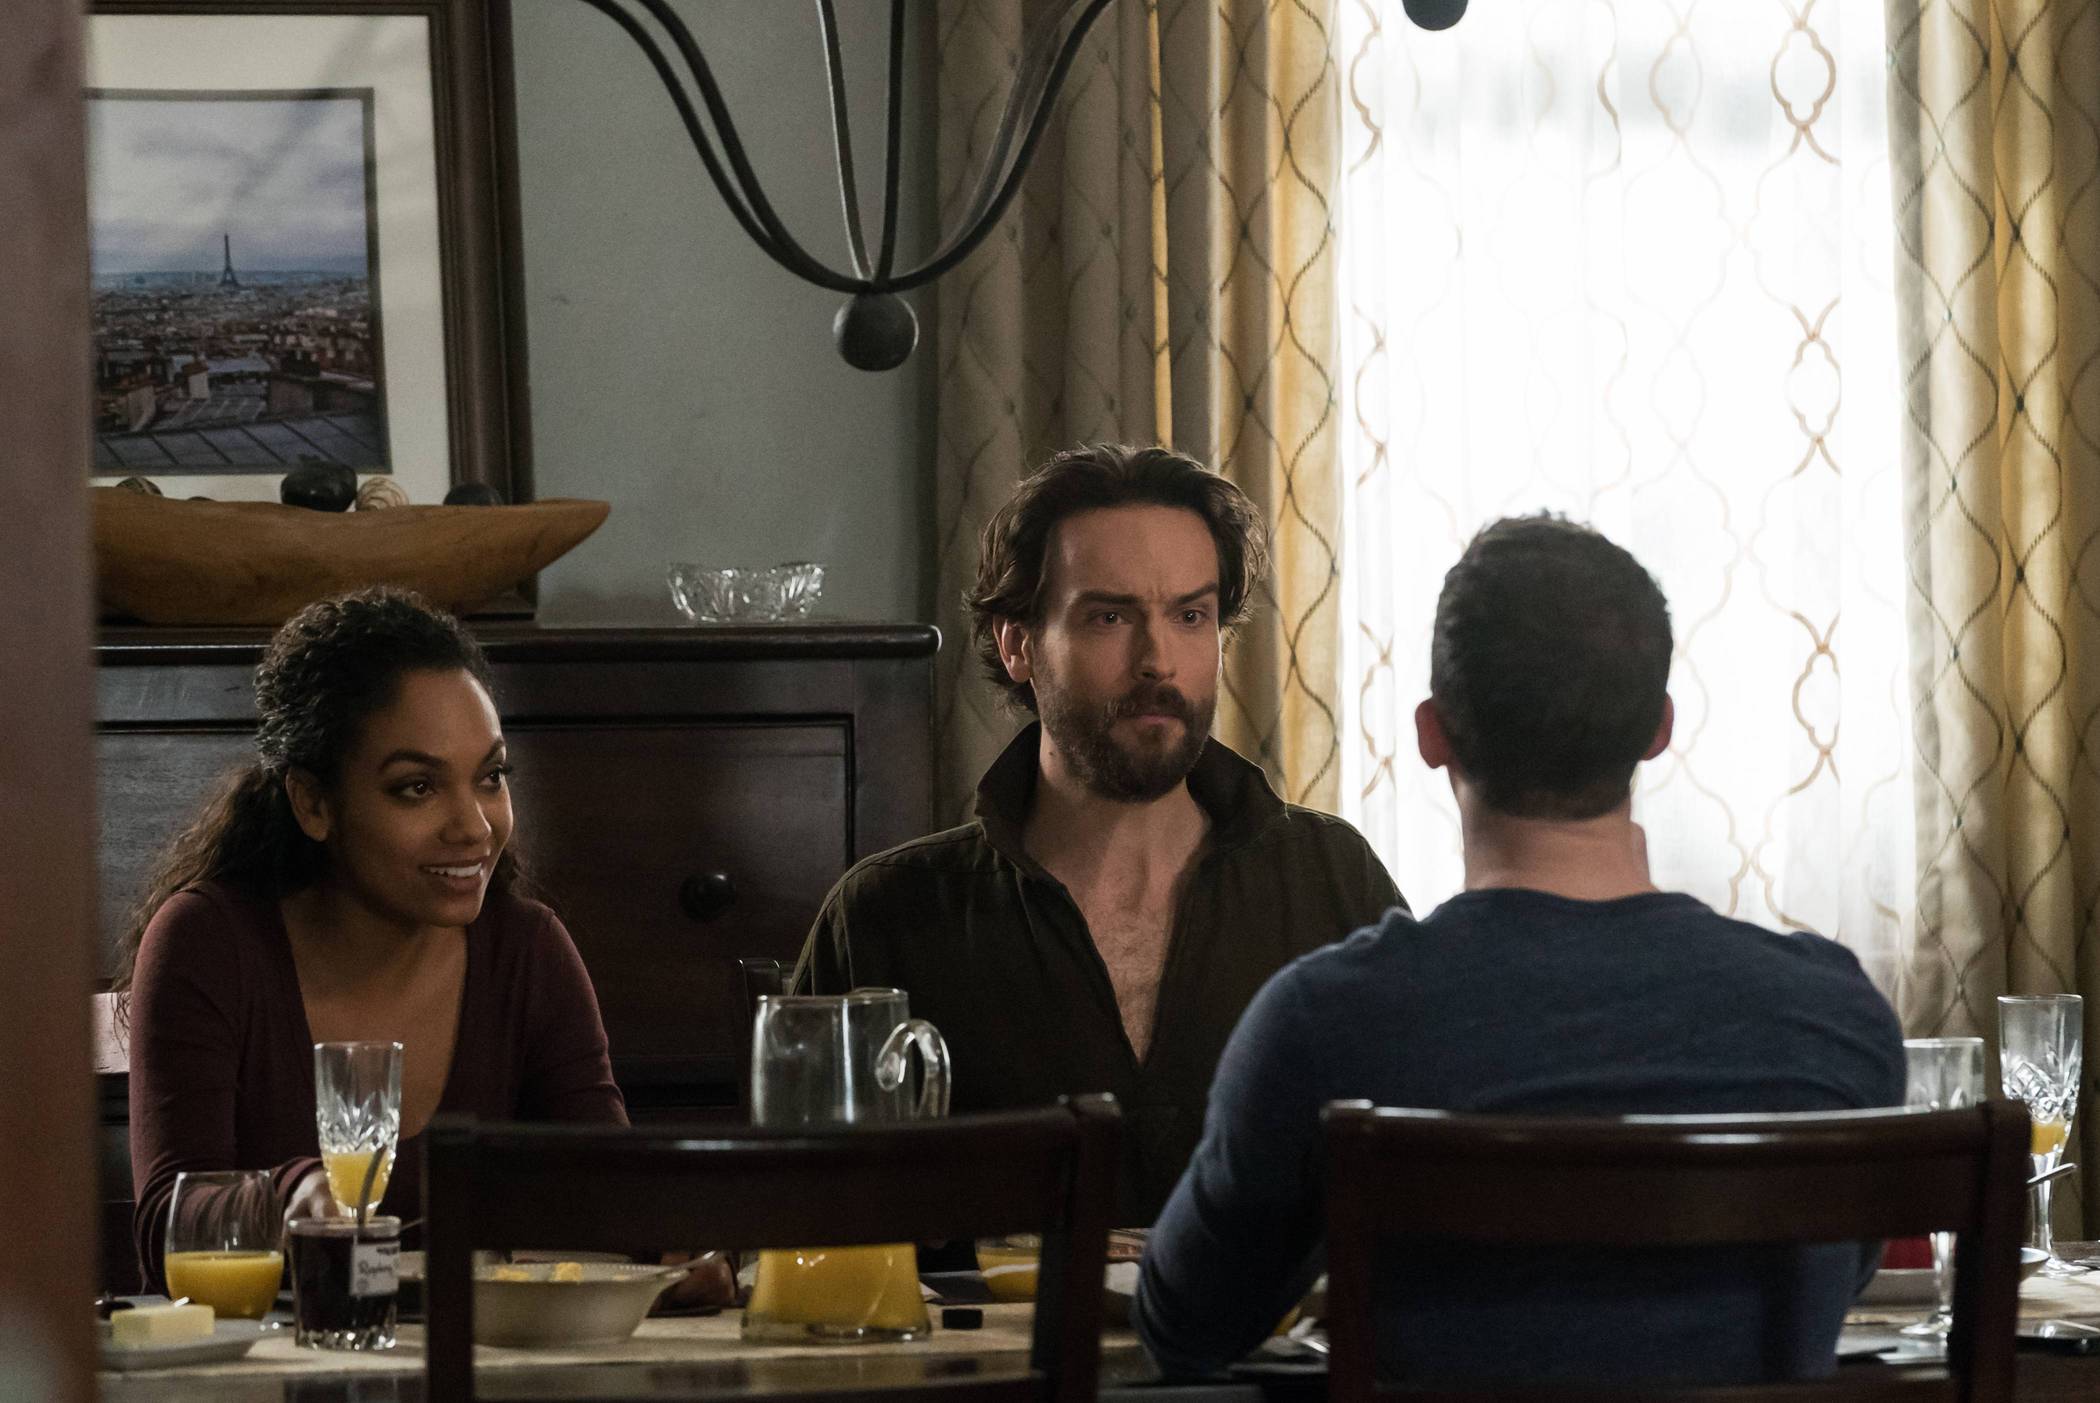 SLEEPY HOLLOW: L-R: Lyndie Greenwood and Tom Mison in the ÒDark MirrorÓ episode of SLEEPY HOLLOW airing Friday, March 4 (8:00-9:01 PM ET/PT) on FOX. ©2016 Fox Broadcasting Co. Cr: Tina Rowden/FOX